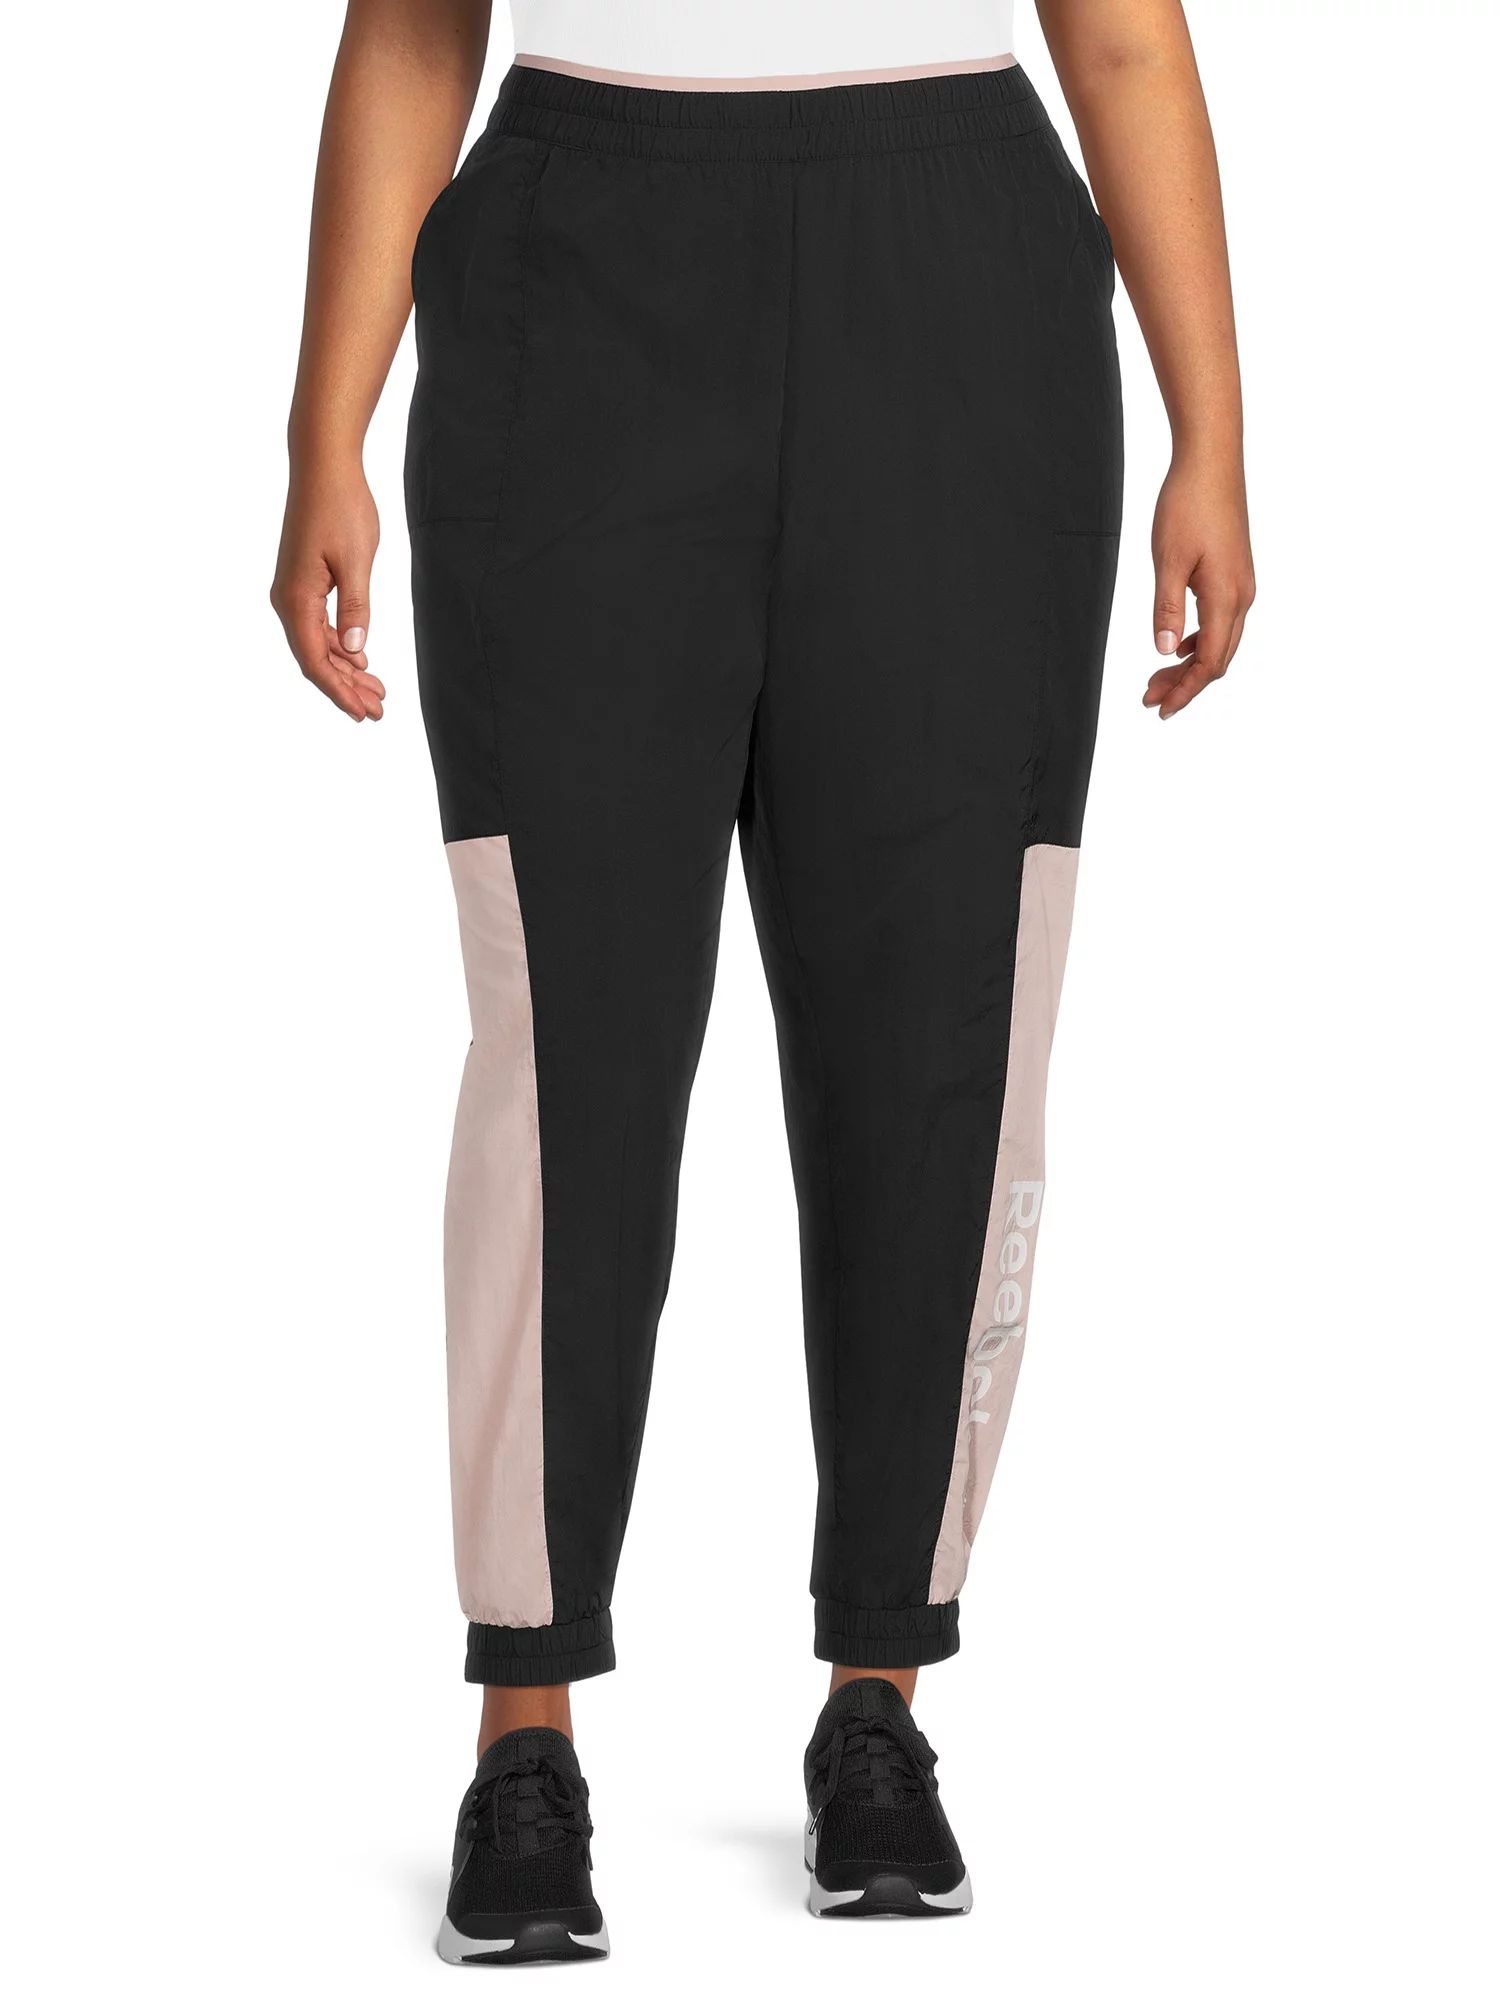 Reebok Women's Plus Size Focus Track Woven Pants with Front Side Pockets and Back Zipper Pocket -... | Walmart (US)